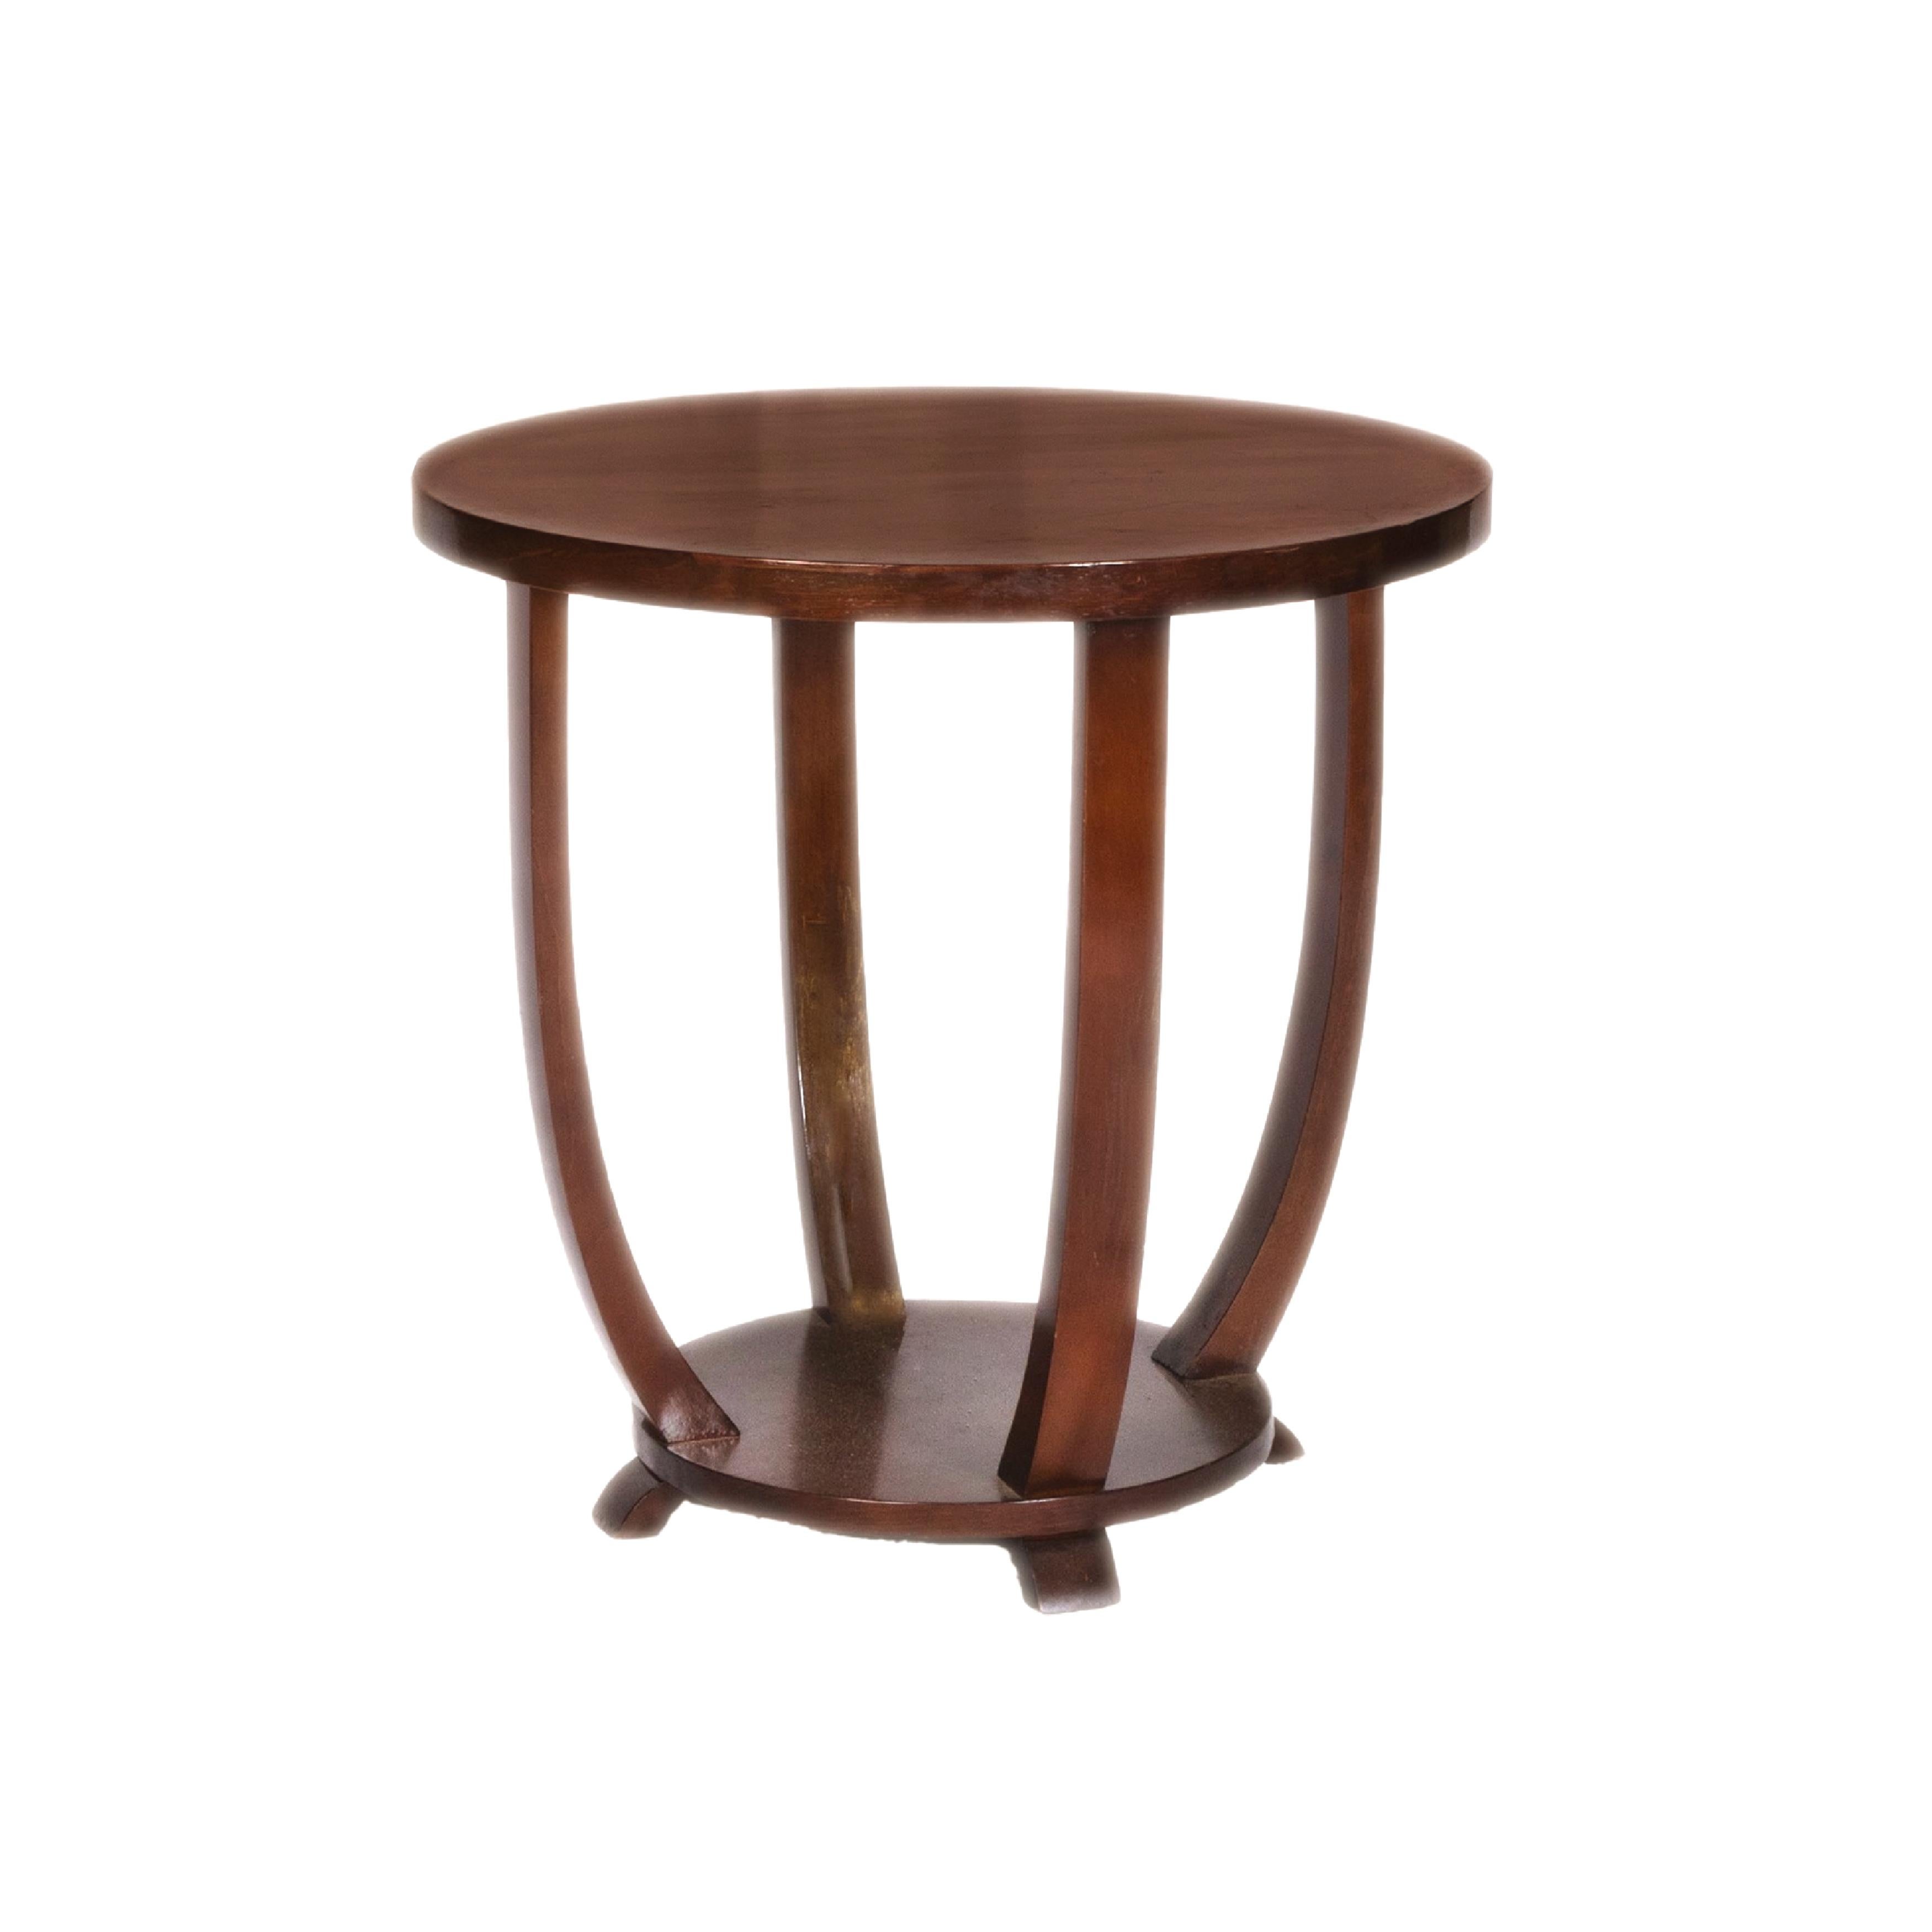 An Art Deco french two levels round side table made of Walnut and veneer, four curved legs assembled on a circular base.
A Deco reminder of elegant times.